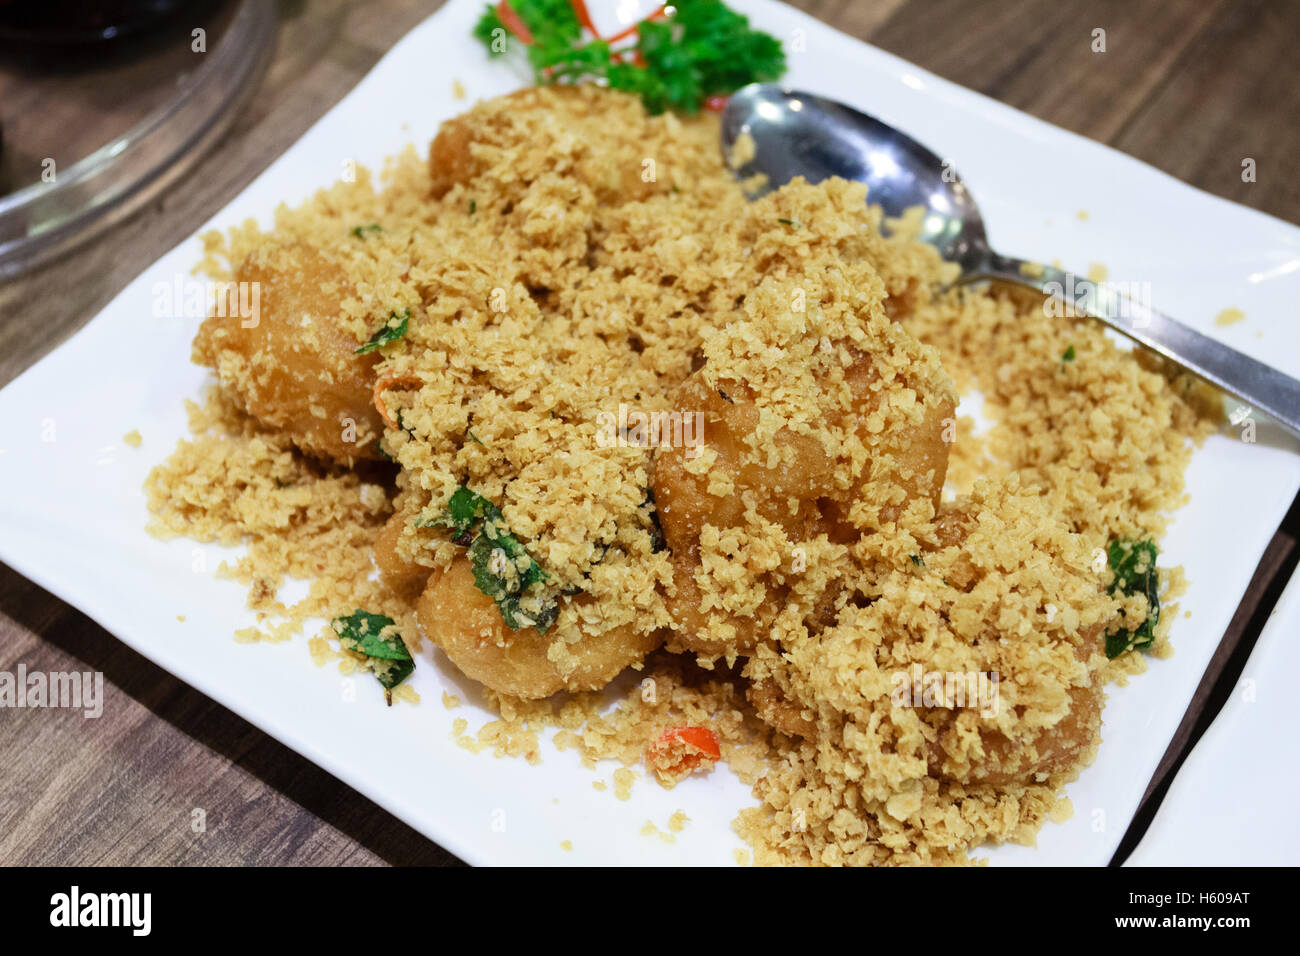 Chinese food dish of cereal prawns in a restaurant in Singapore Stock Photo